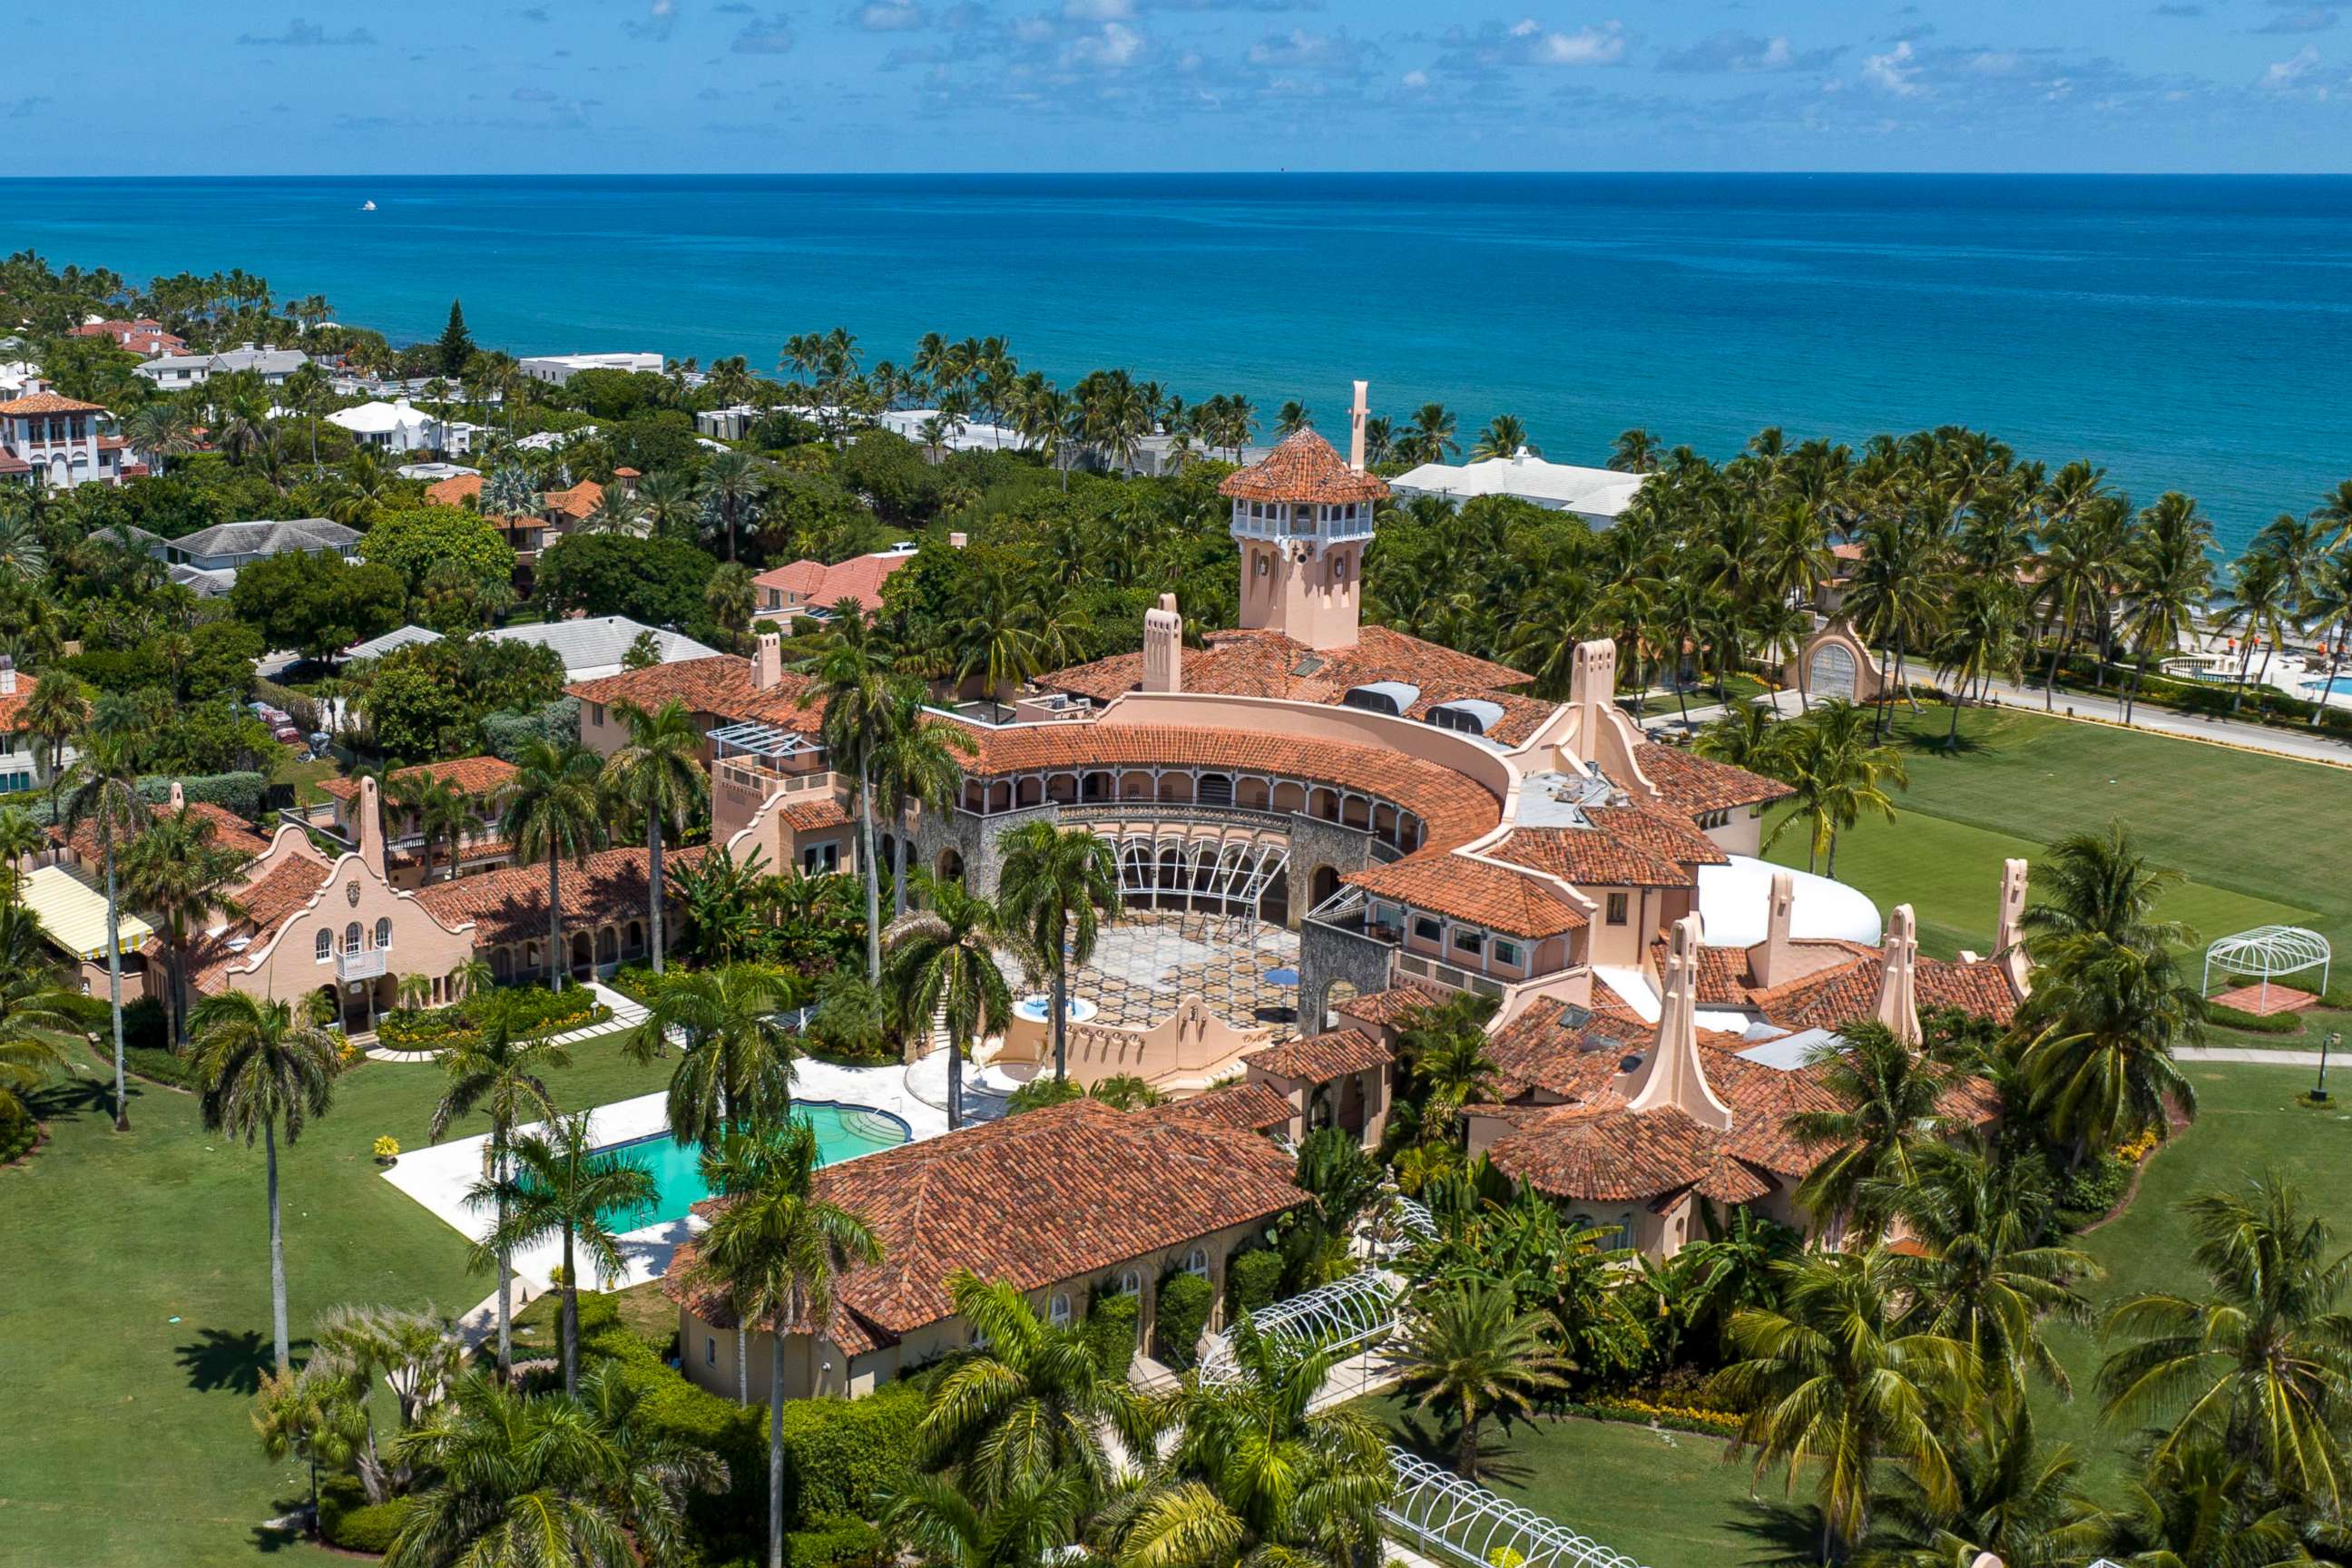 PHOTO: In this Aug. 31, 2022, file photo, former President Donald Trump's Mar-a-Lago club is shown in Palm Beach, Fla.